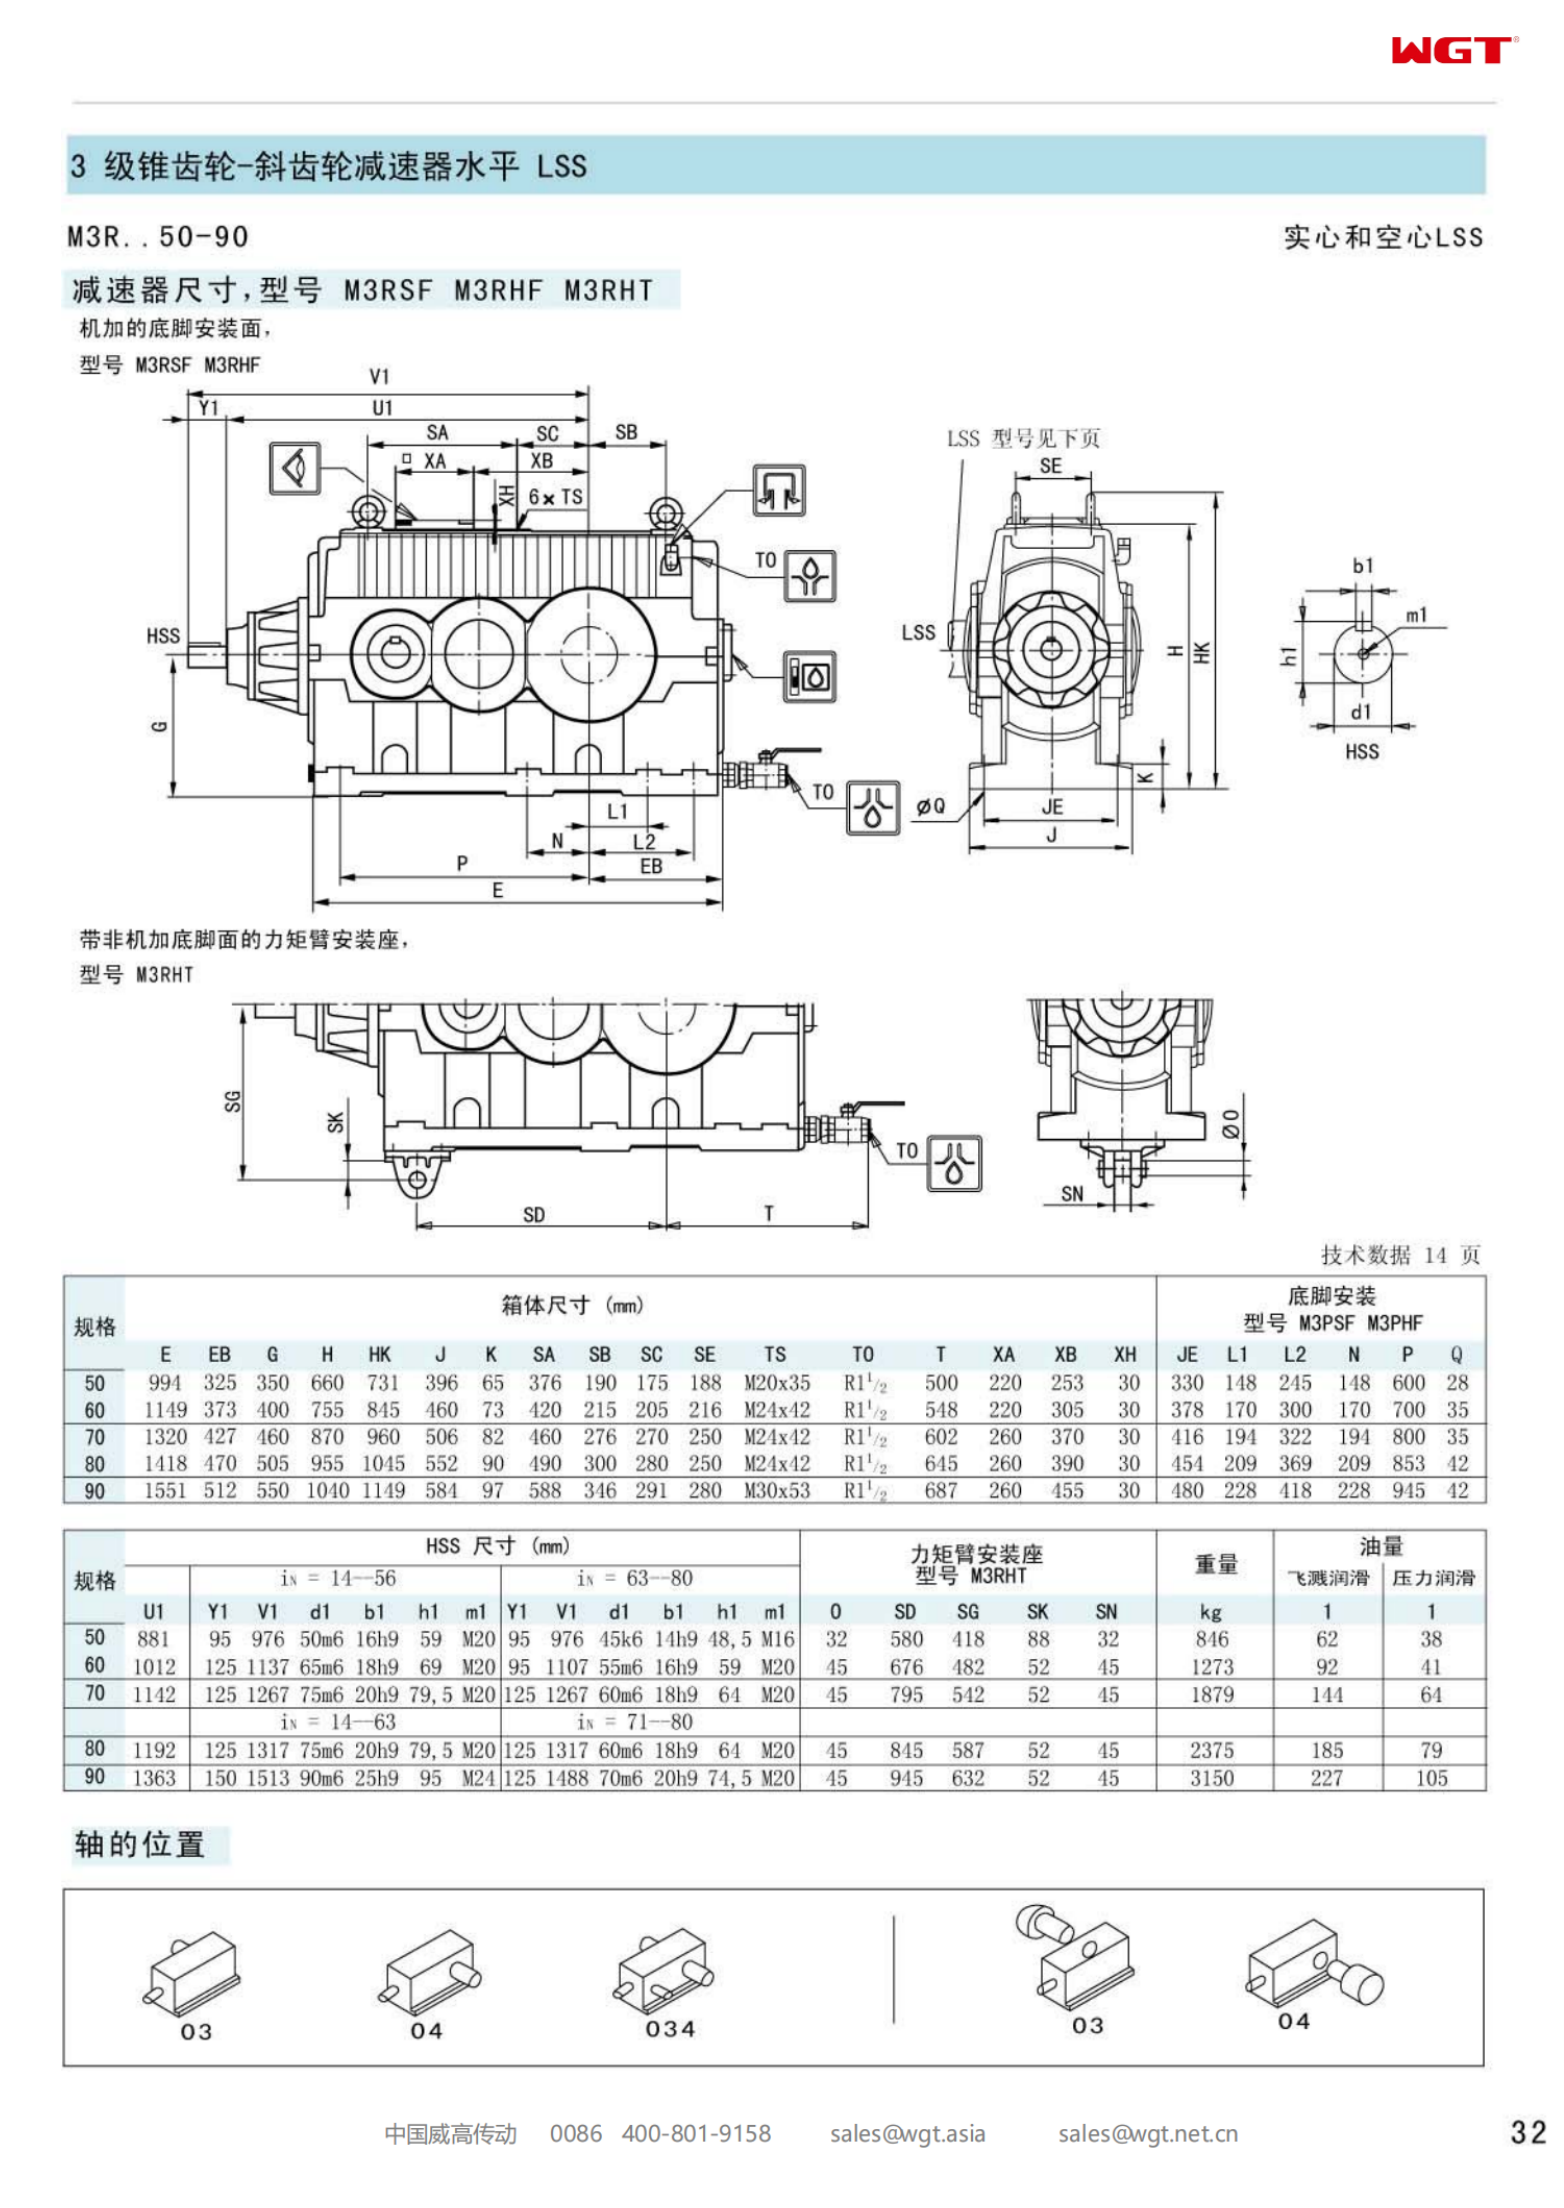 M3RSF50 Replace_SEW_M_Series Gearbox